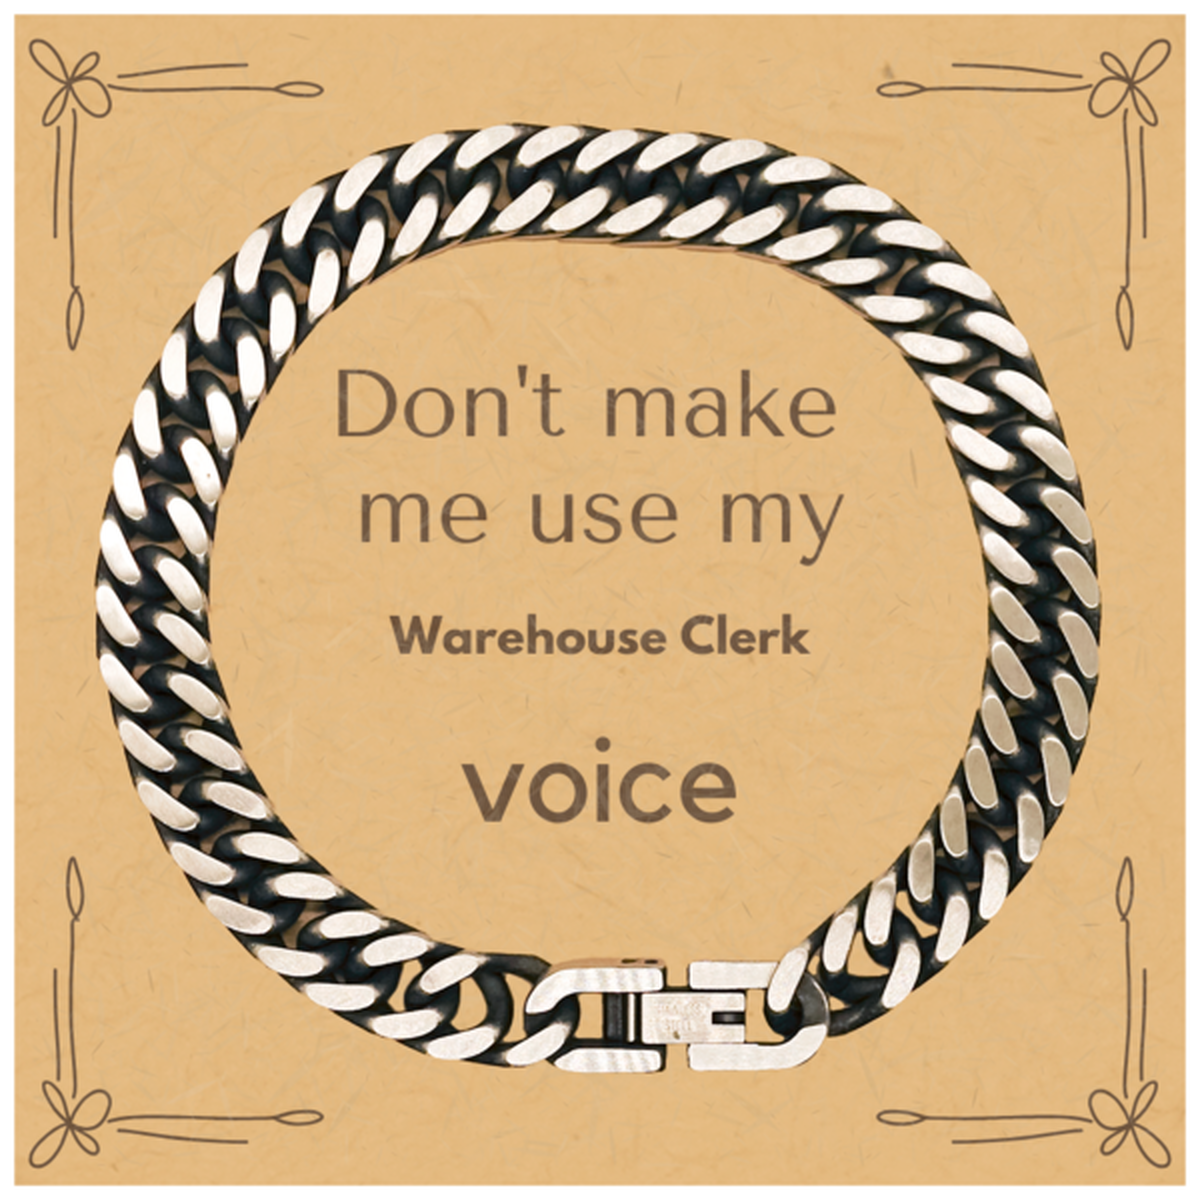 Don't make me use my Warehouse Clerk voice, Sarcasm Warehouse Clerk Card Gifts, Christmas Warehouse Clerk Cuban Link Chain Bracelet Birthday Unique Gifts For Warehouse Clerk Coworkers, Men, Women, Colleague, Friends